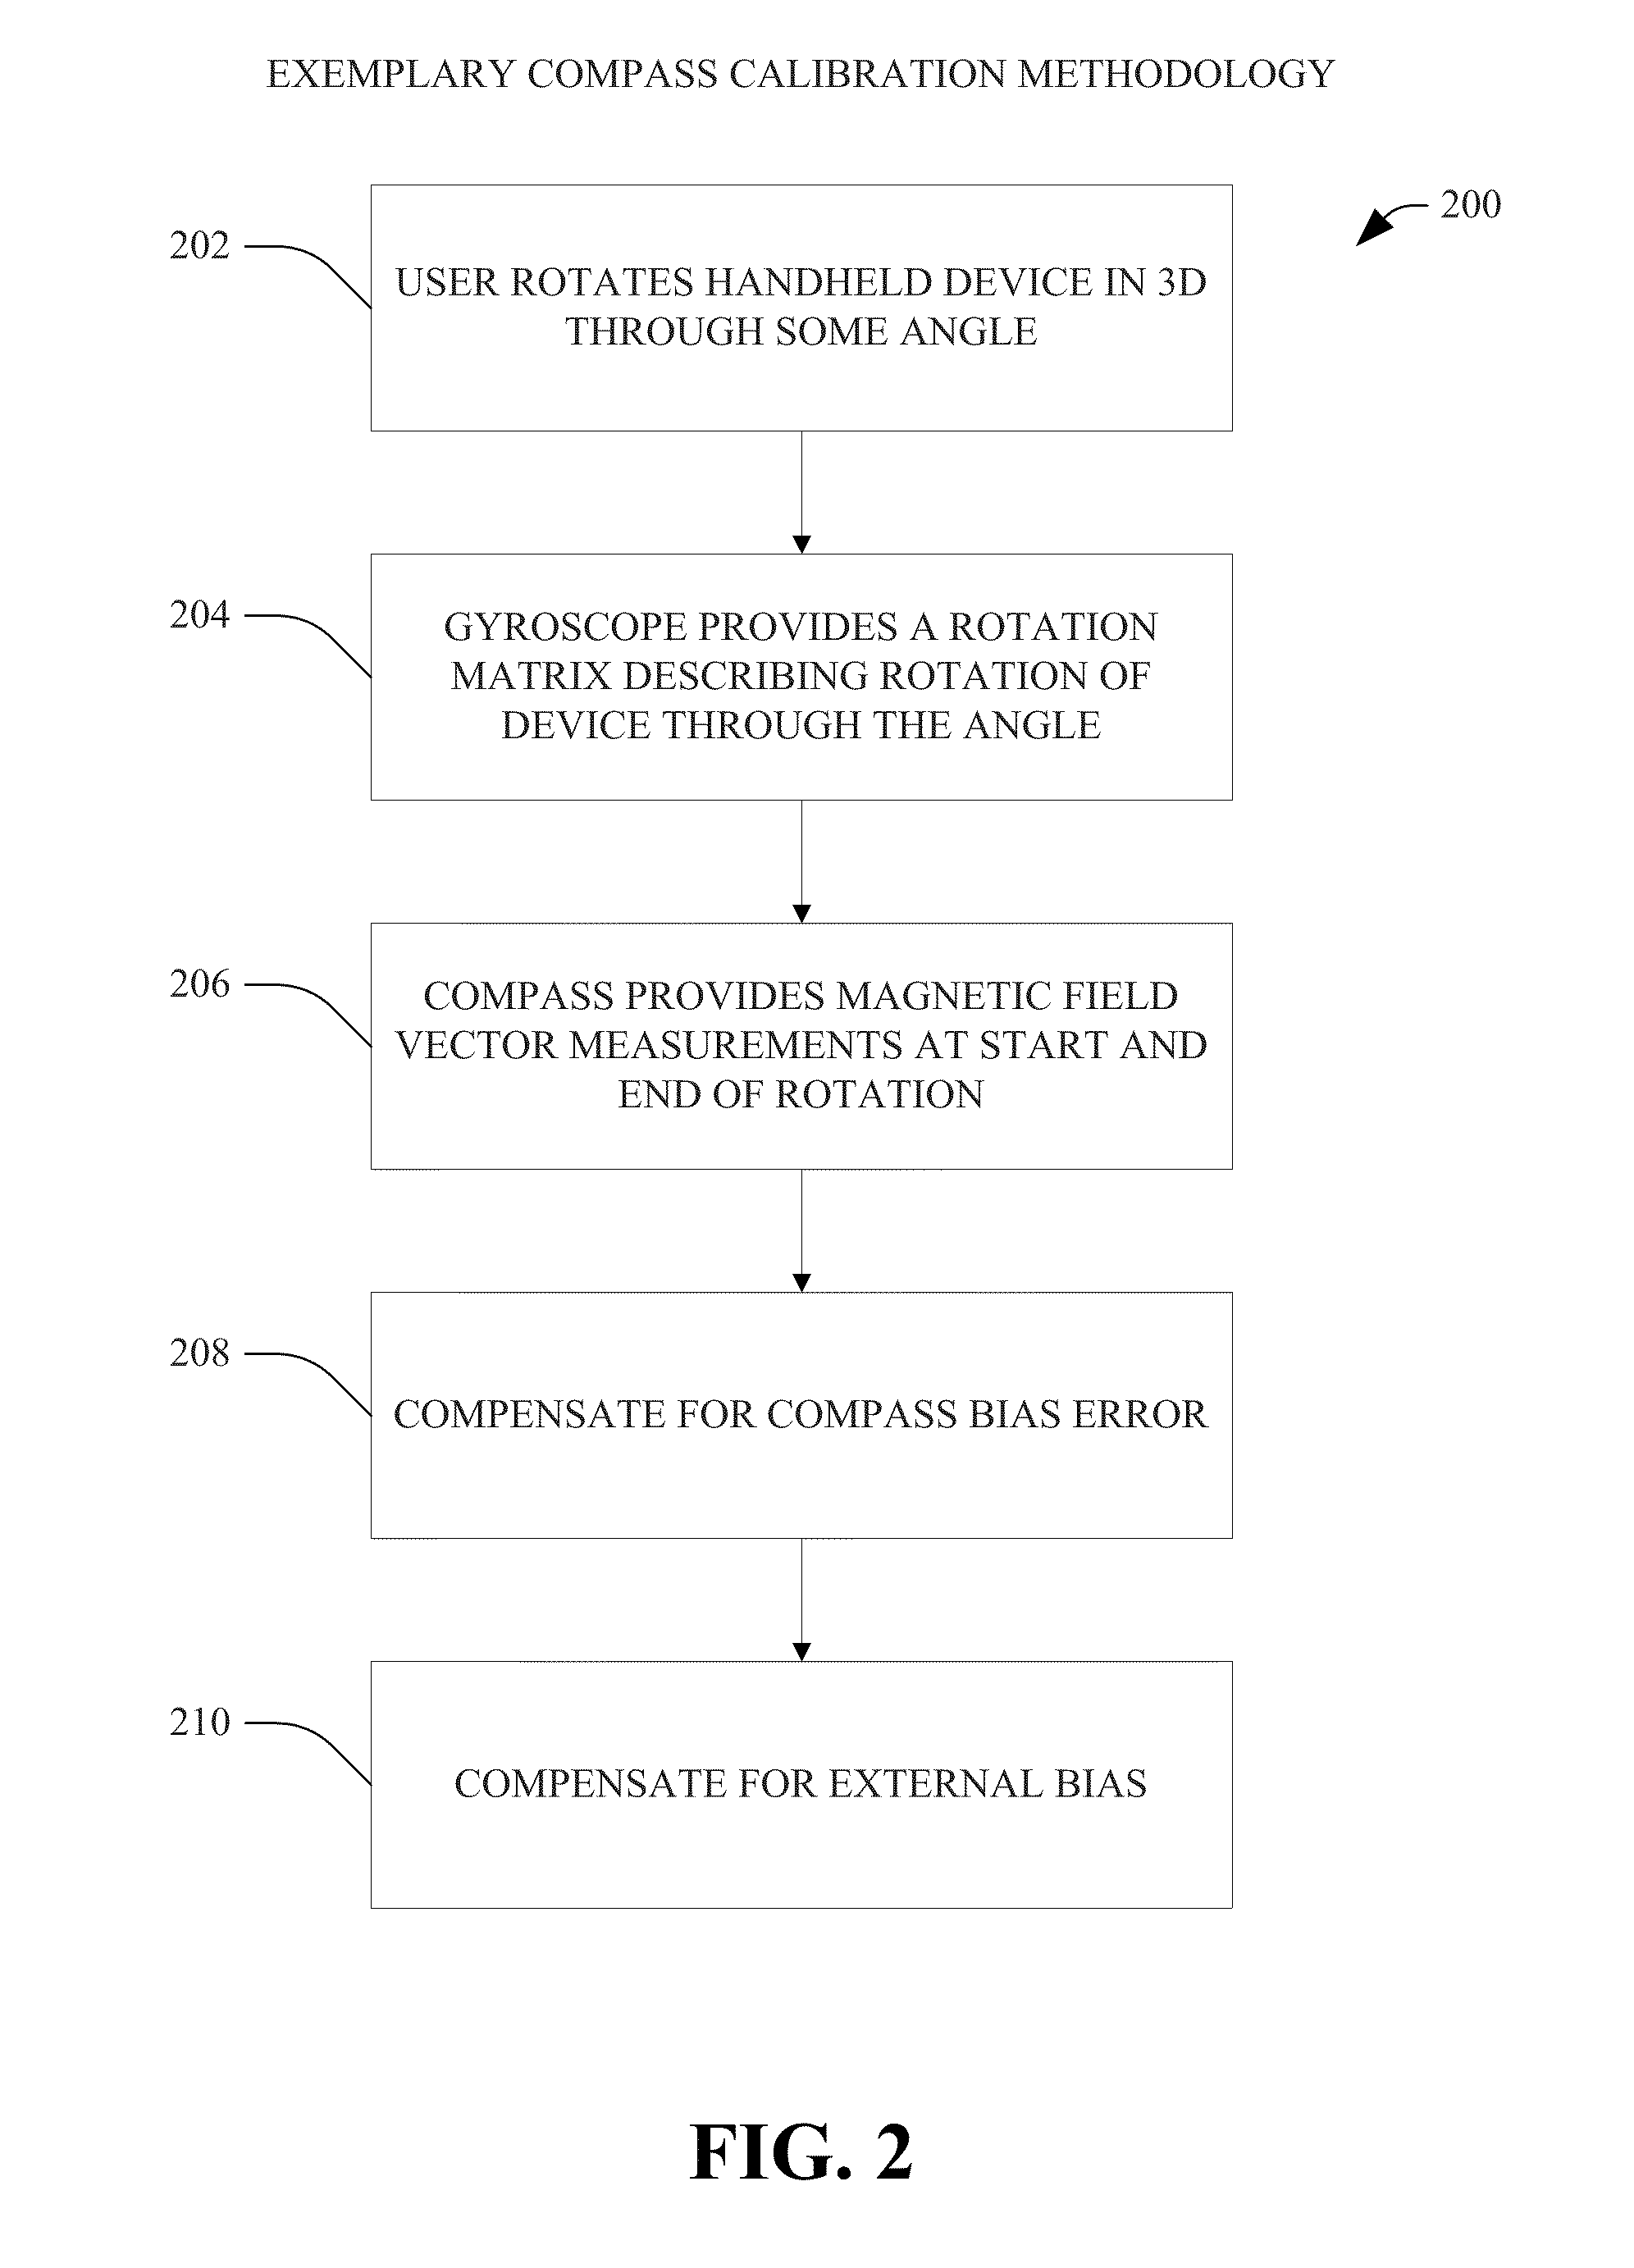 Apparatus and methodology for calibration of a gyroscope and a compass included in a handheld device